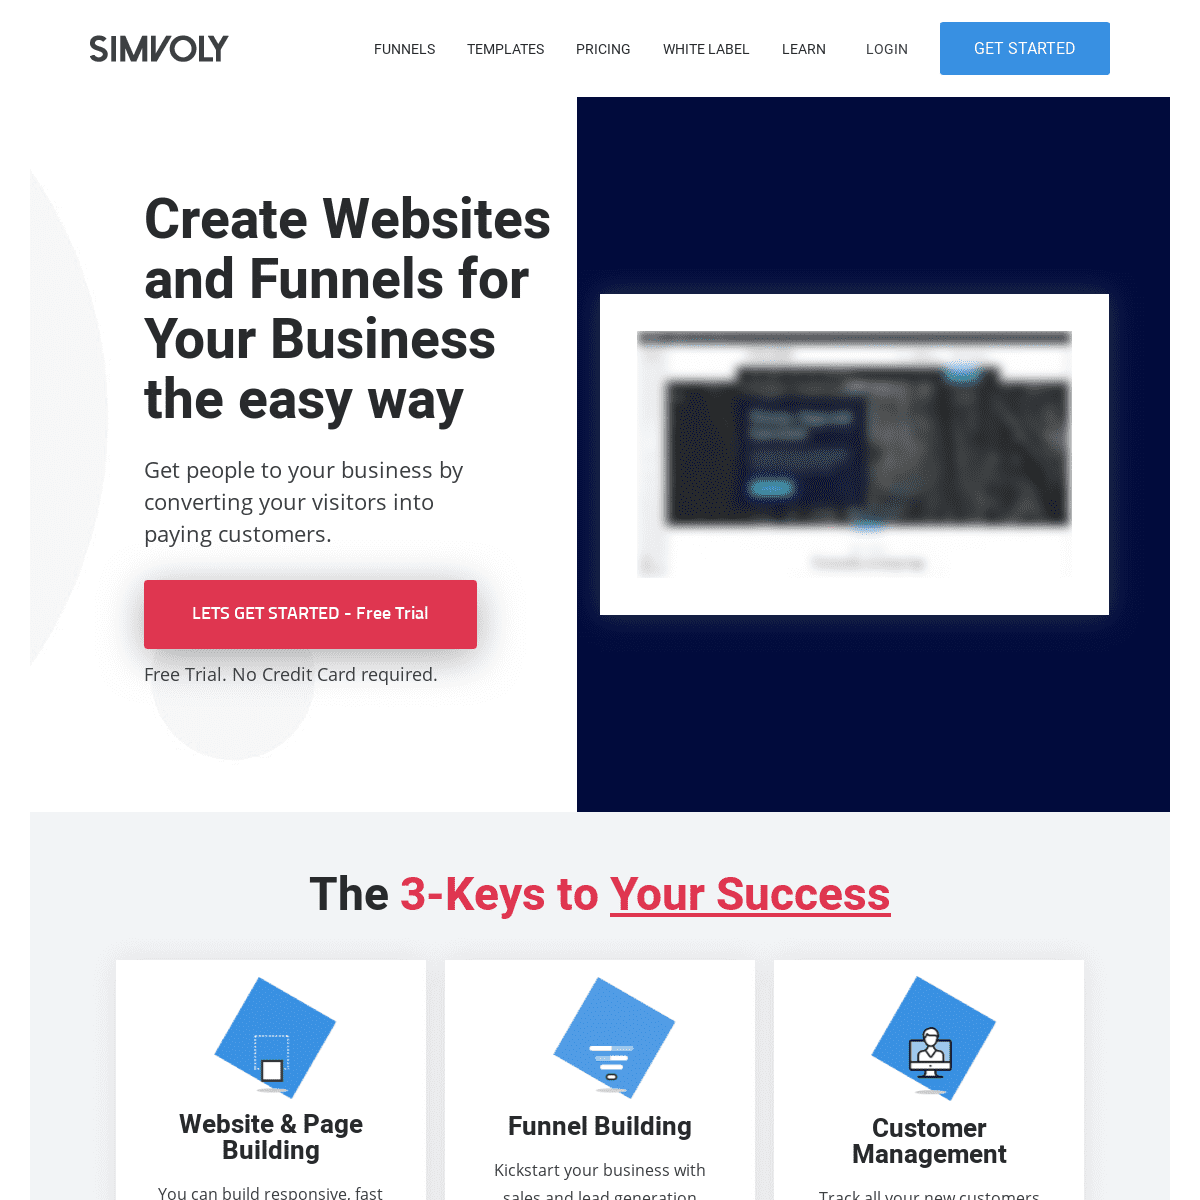 A complete backup of simvoly.com